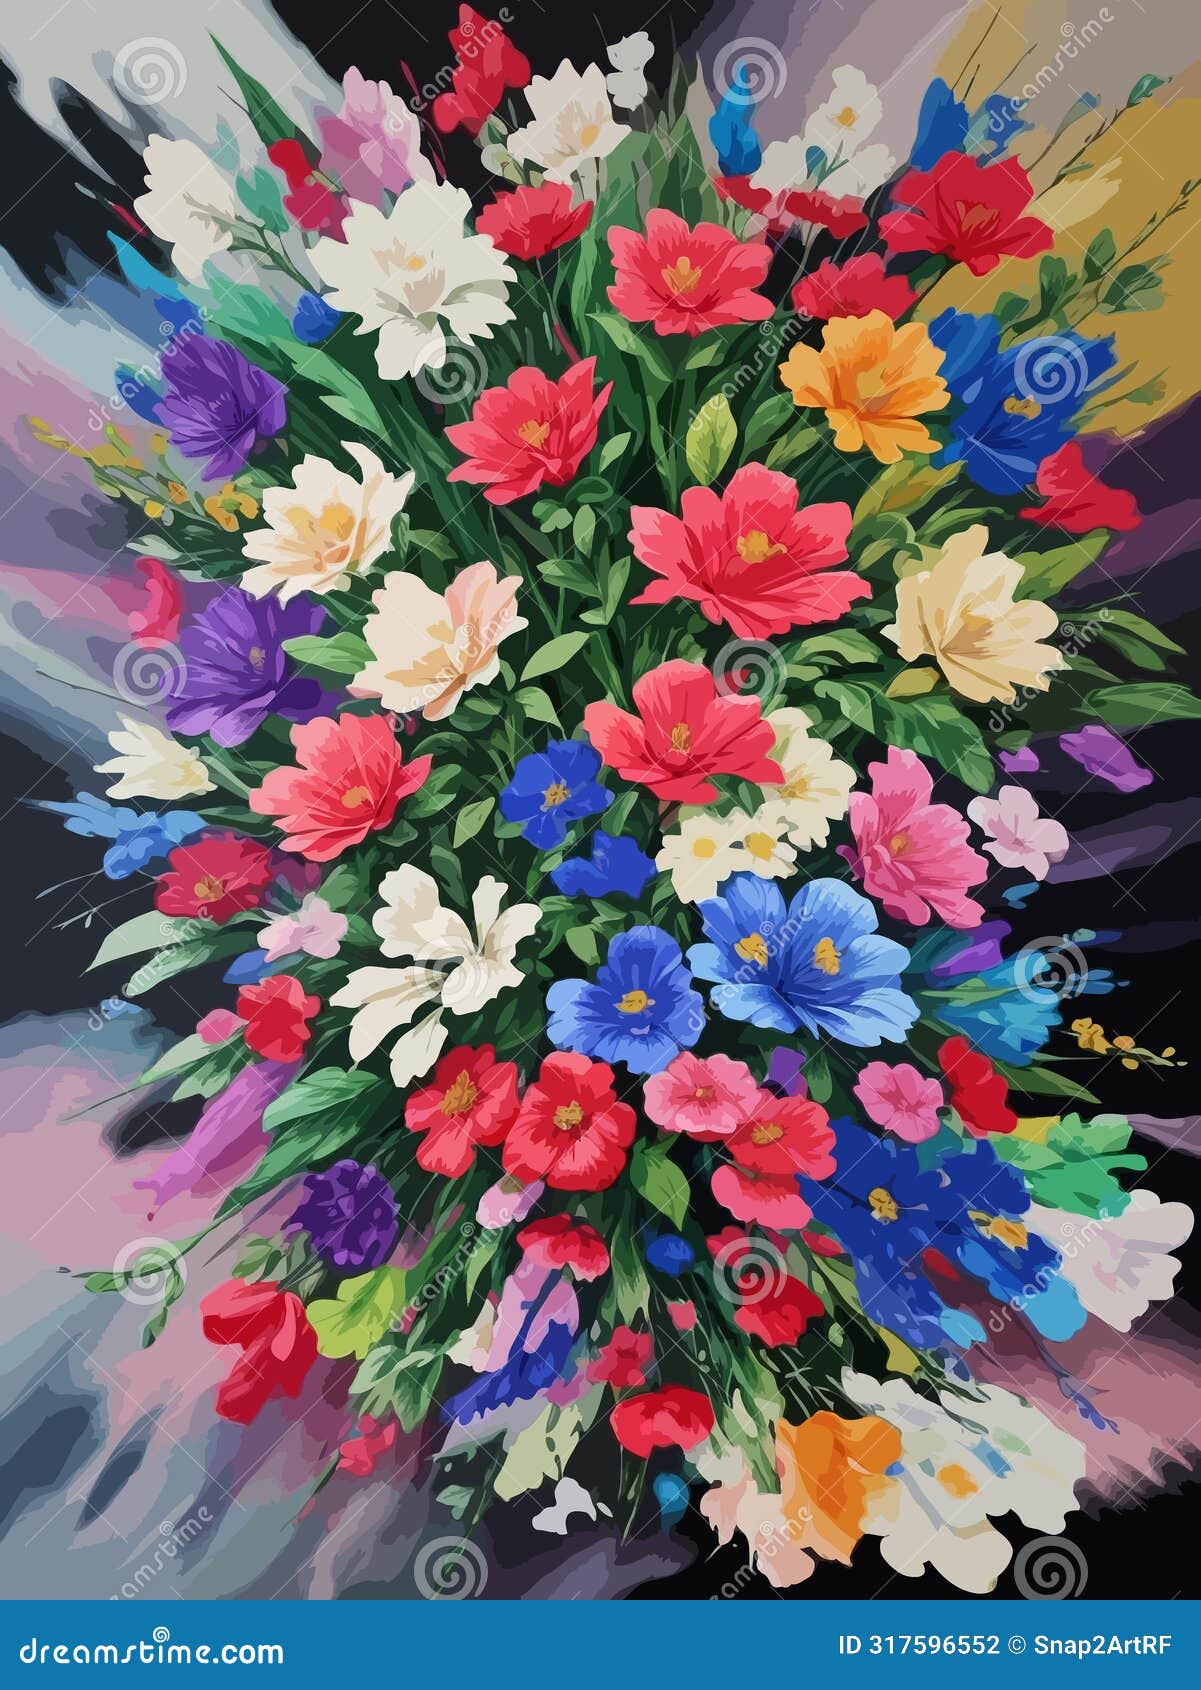 high detailed full color  - exuberant bloom painting - an expressive floral rhapsody,  eps